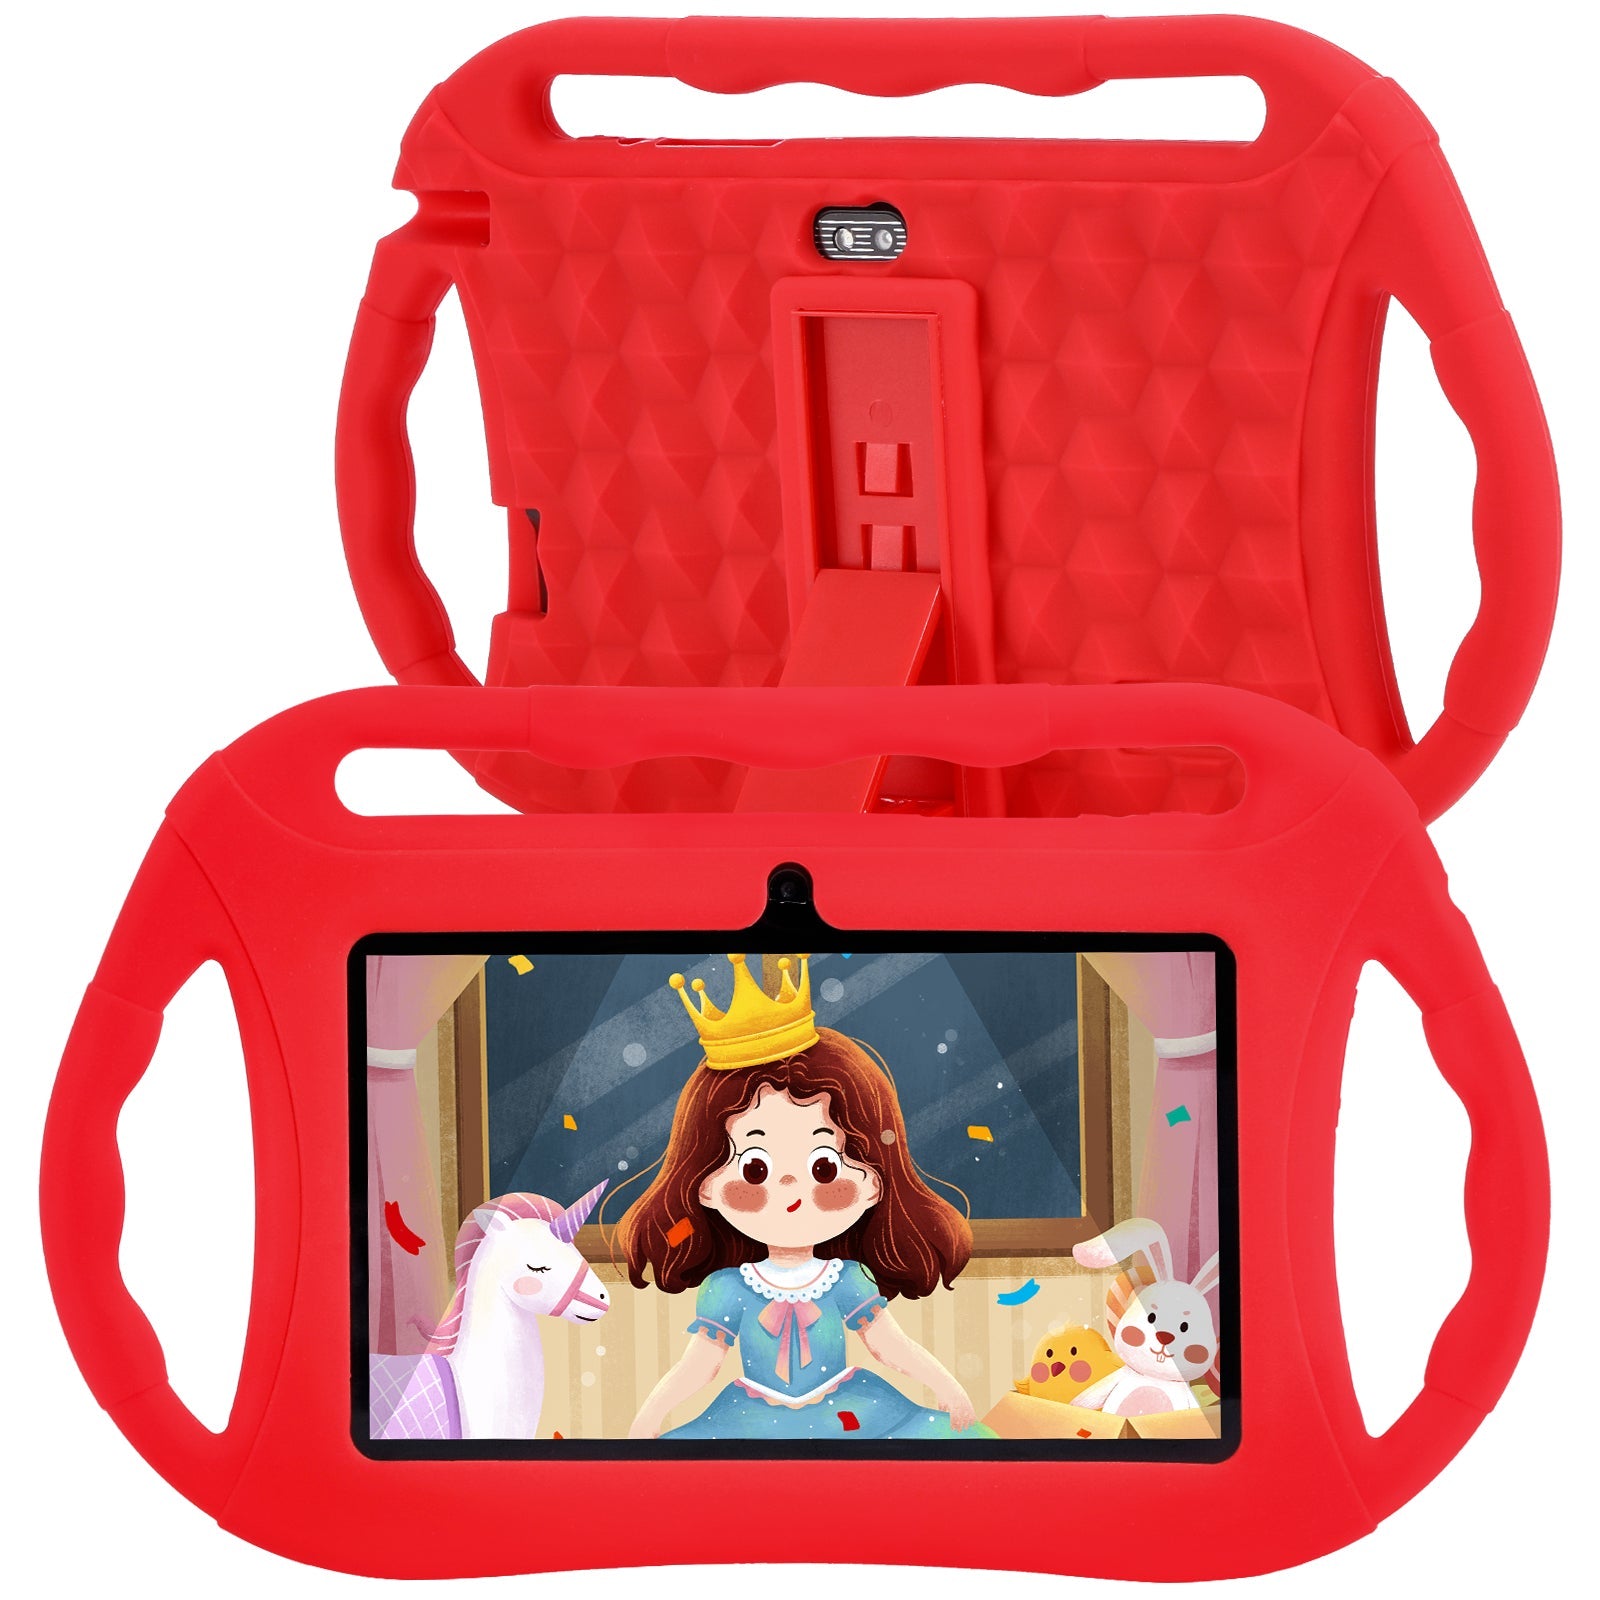 Veidoo Android Toddler Tablet for Kids 7 inch 32GB WiFi Dual Camera Kids Content Parental Control Tablet Pc with Kid-Proof Case | Electrr Inc